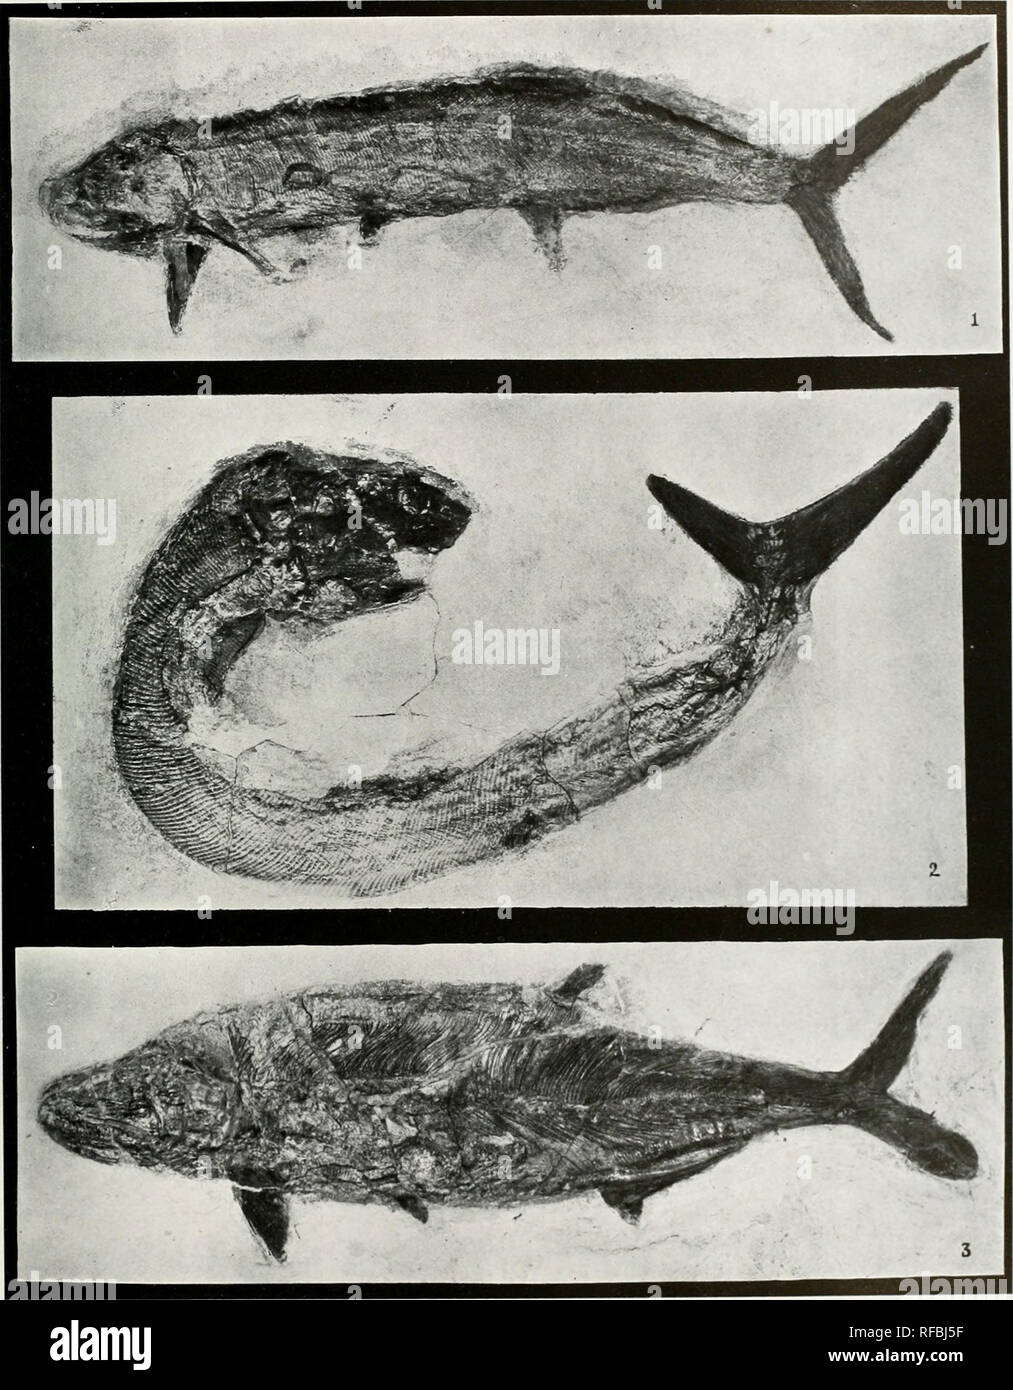 . Catalog of fossil fishes in the Carnegie Museum. Fishes, Fossil. Memoirs Carnegie Museum, Vol. VI, Plate LXXI,. Fk;. 1. Hi/]&gt;s()corniuy niacrodiin ( W.uin'ku ). Fid. 2. Hypsocormus macrixhtii (Waiim-.k). Lower Lohk ok Cai'du,. Fi(i. 'A. Hypsocormuf: inKkpiis V(!NKi;. C M. Cat. Vn&gt; ,s. FisllKs, X. xw. 7l).') MM. M. Cat. Fos V FisiiKs. No. .')lllll. •III.') MM. •lioM ( 't K 1 Cat. Fo.s.s. Kl.sllK.s, No. .&quot;) i'.tS. .') id MM.. Please note that these images are extracted from scanned page images that may have been digitally enhanced for readability - coloration and appearance of t Stock Photo